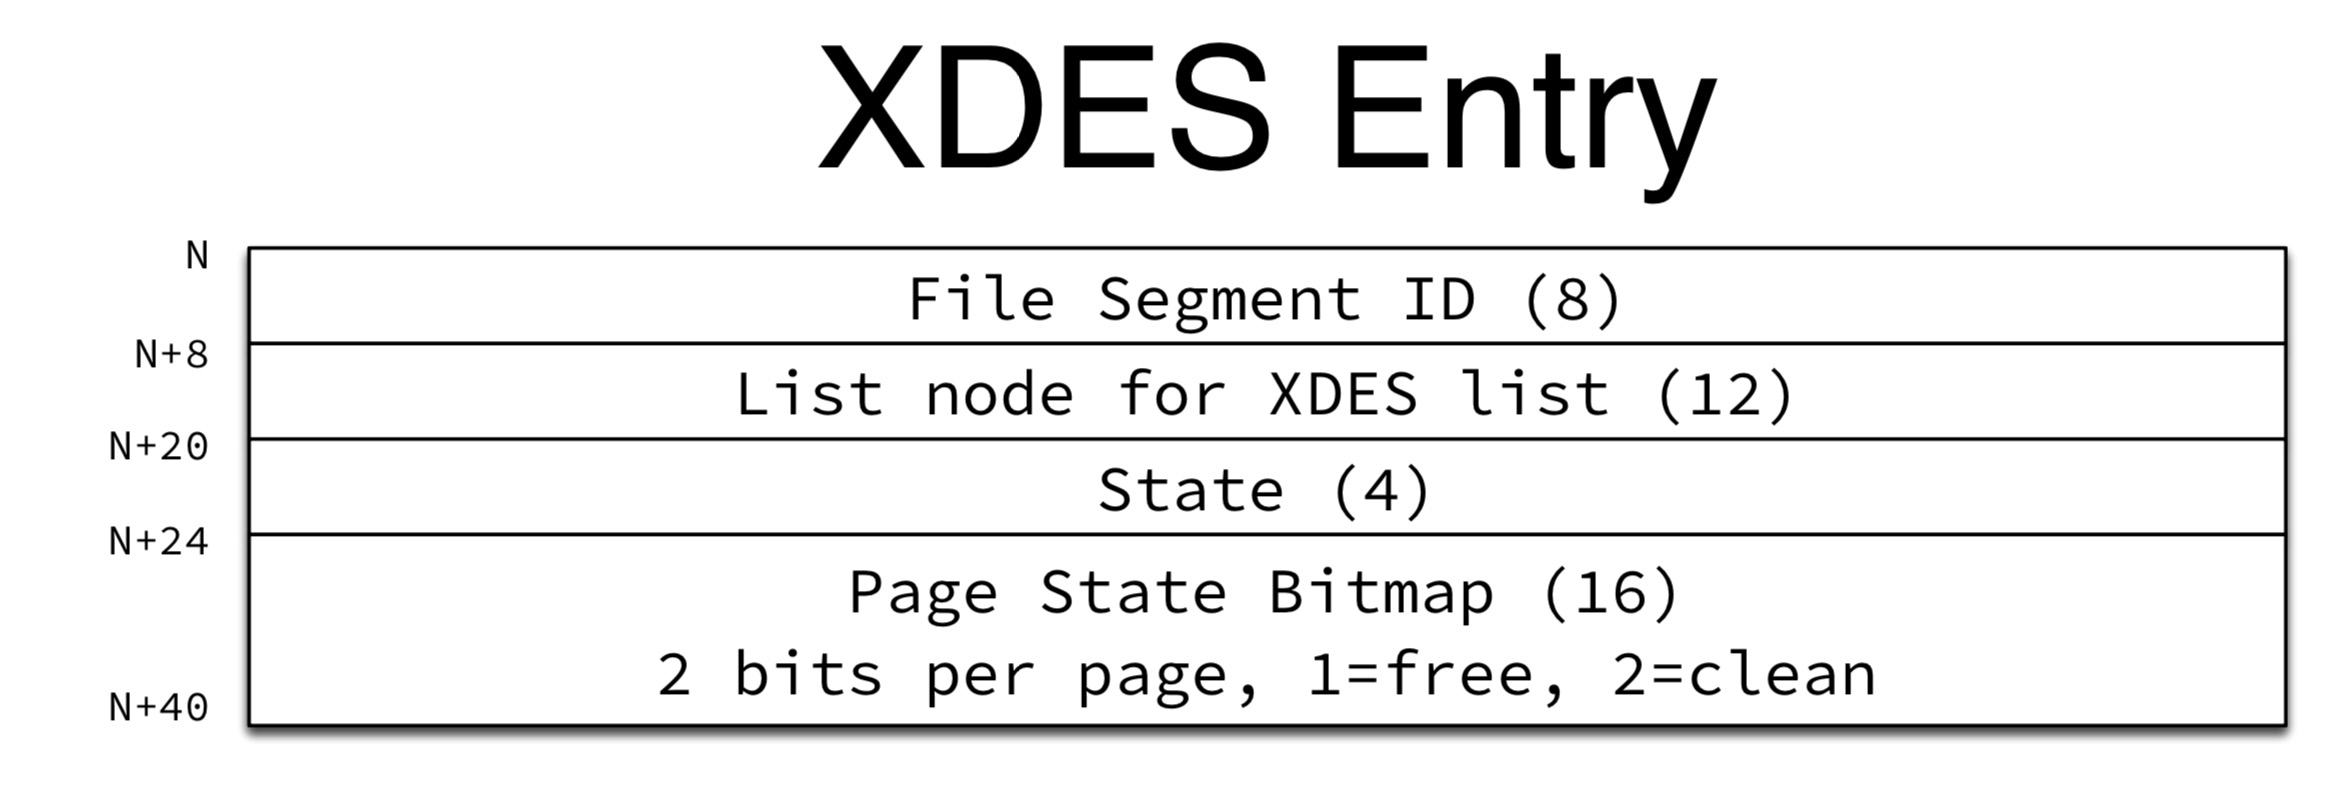 xdes_entry